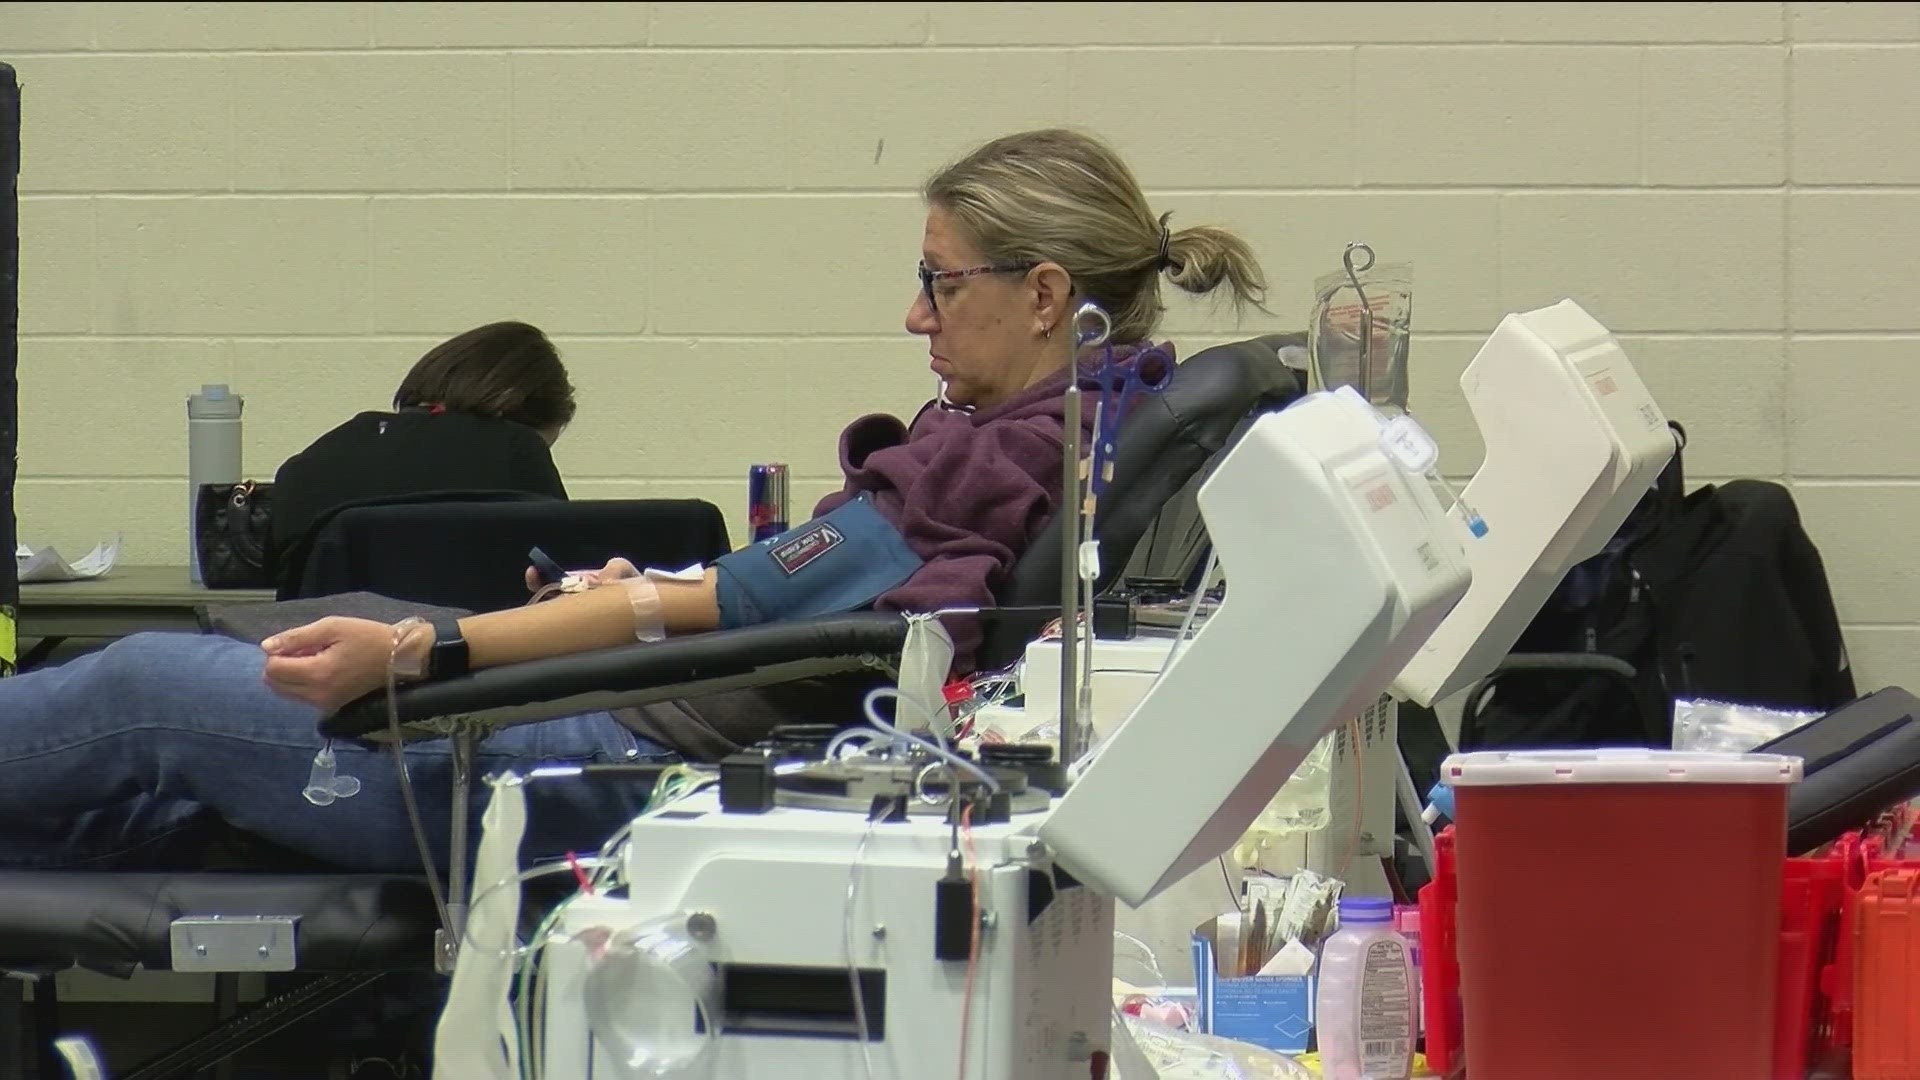 While the nation is not currently having a blood shortage crisis, the need for blood is always there.